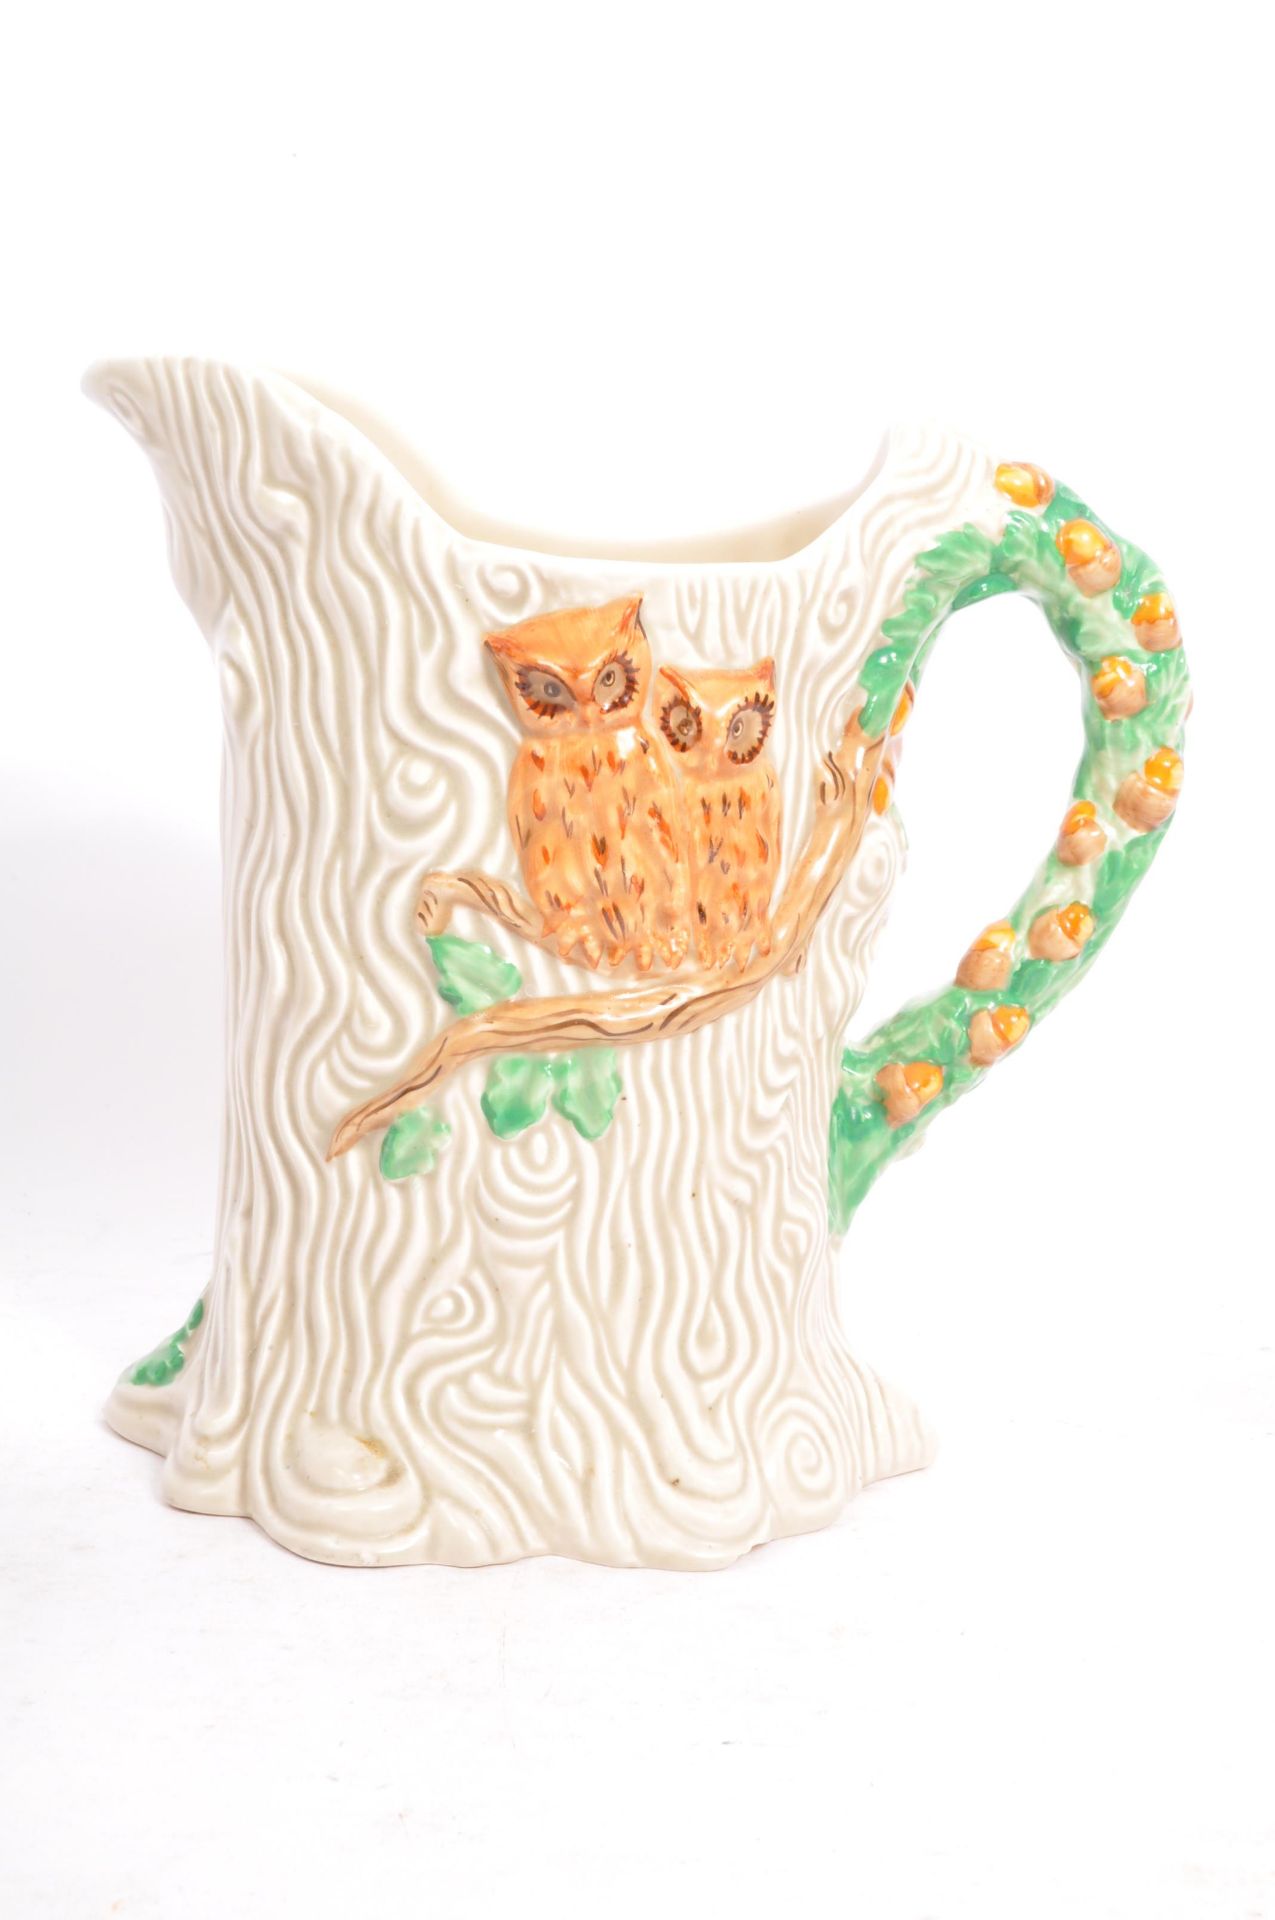 PAIR OF ROYAL DOULTON TOBY JUGS WITH CLARICE CLIFF JUG - Image 3 of 5